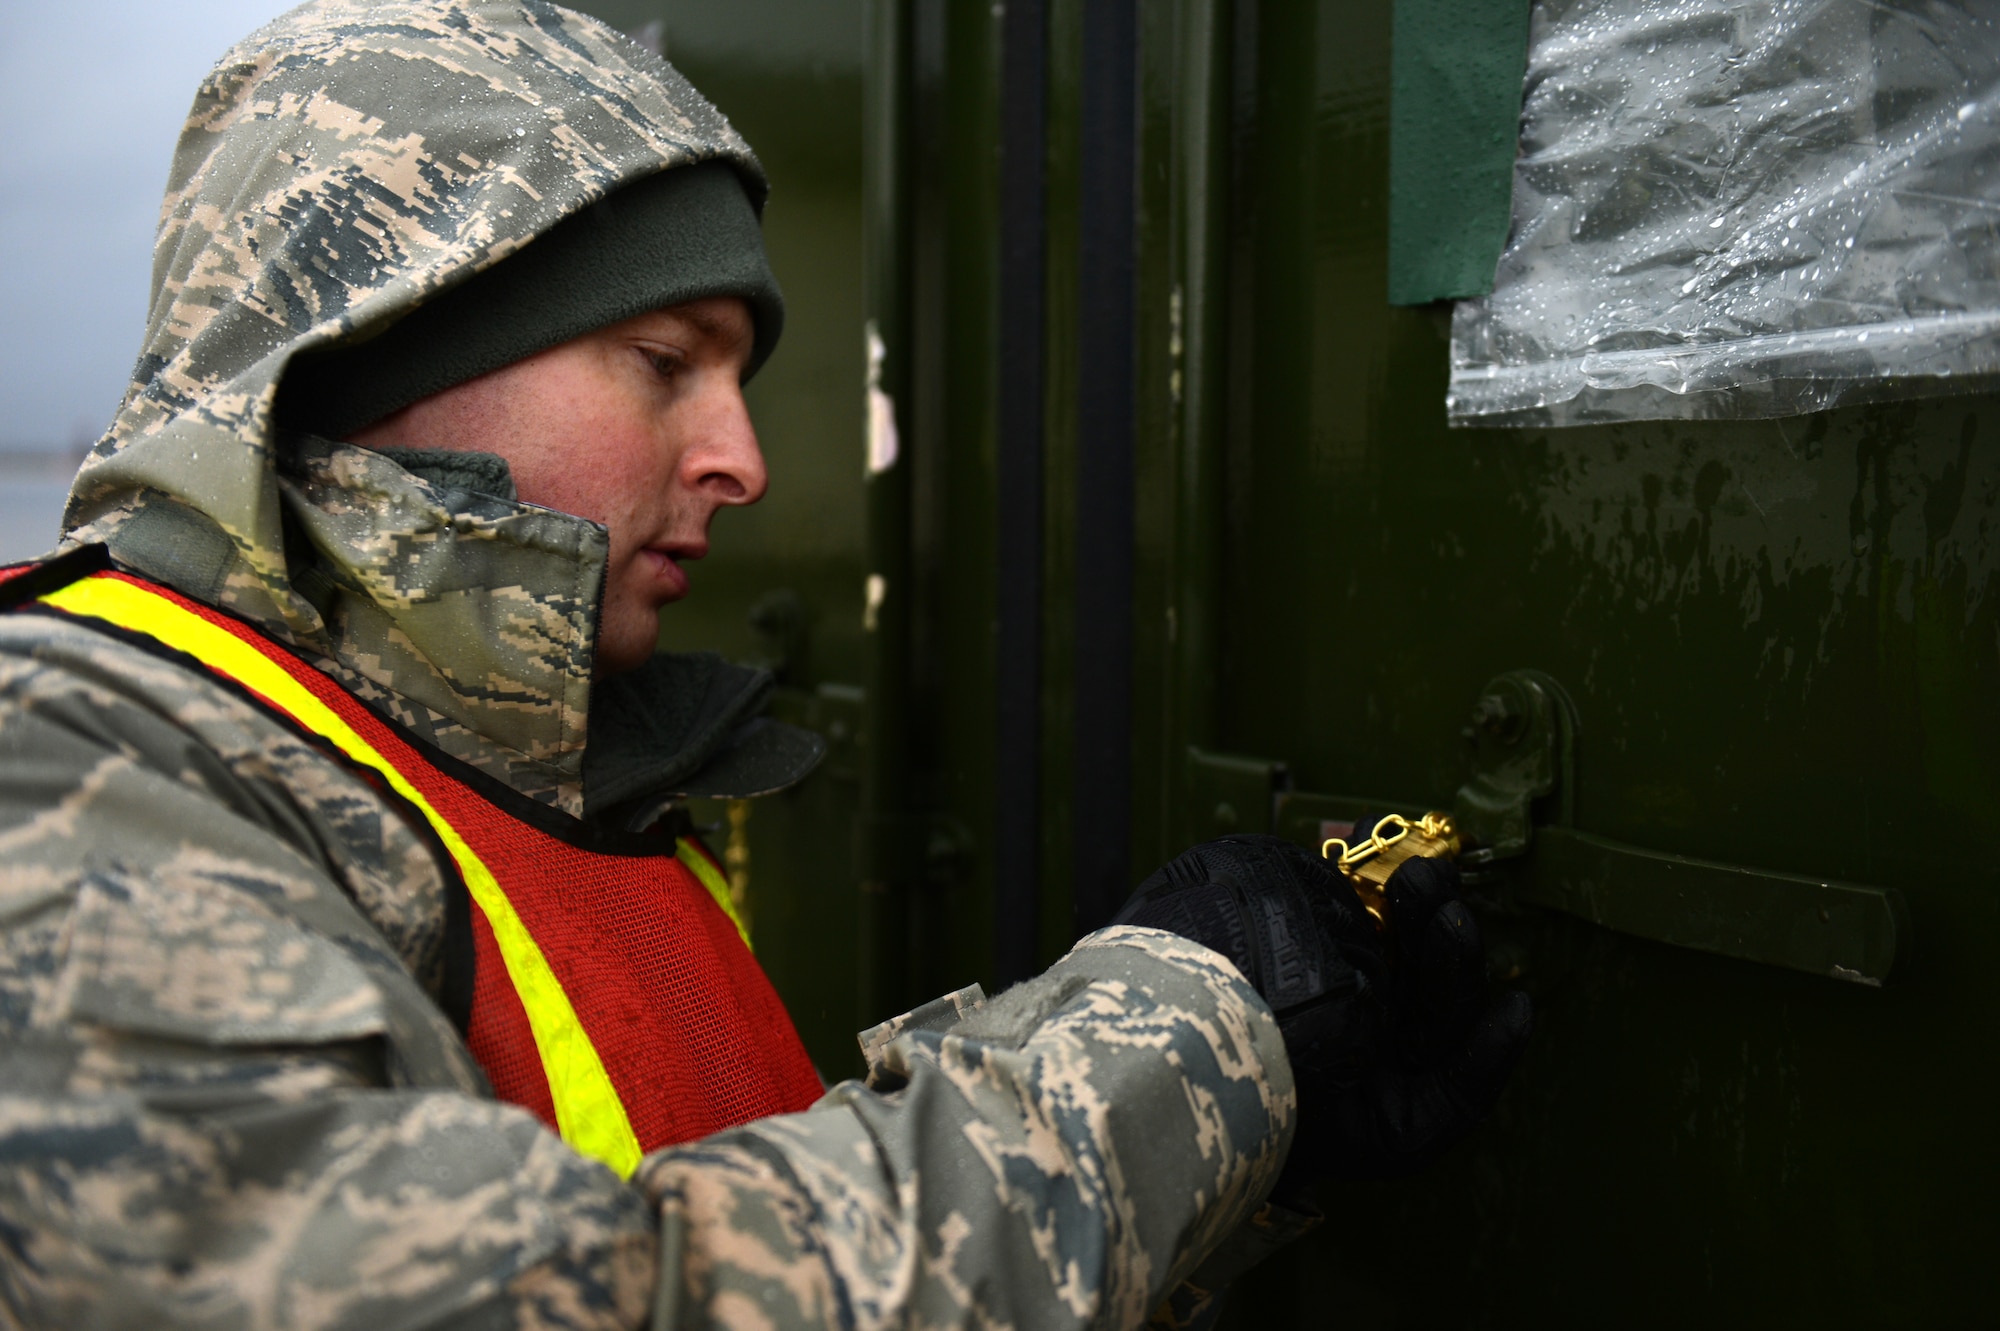 SPANGDAHLEM AIR BASE, Germany – U.S. Air Force Senior Airman Jonathan Loew, 52nd Logistics Readiness Squadron fuels hydrant  operator from Palmer, Alaska, secures a cargo container on the flightline Dec. 27, 2012. Containers must be opened and their contents verified before moving on to the next station. The cargo will accompany the 480th Fighter Squadron to Nellis Air Force Base for Red Flag, an advanced aerial combat training exercise. (U.S. Air Force photo by Airman 1st Class Gustavo Castillo/Released)